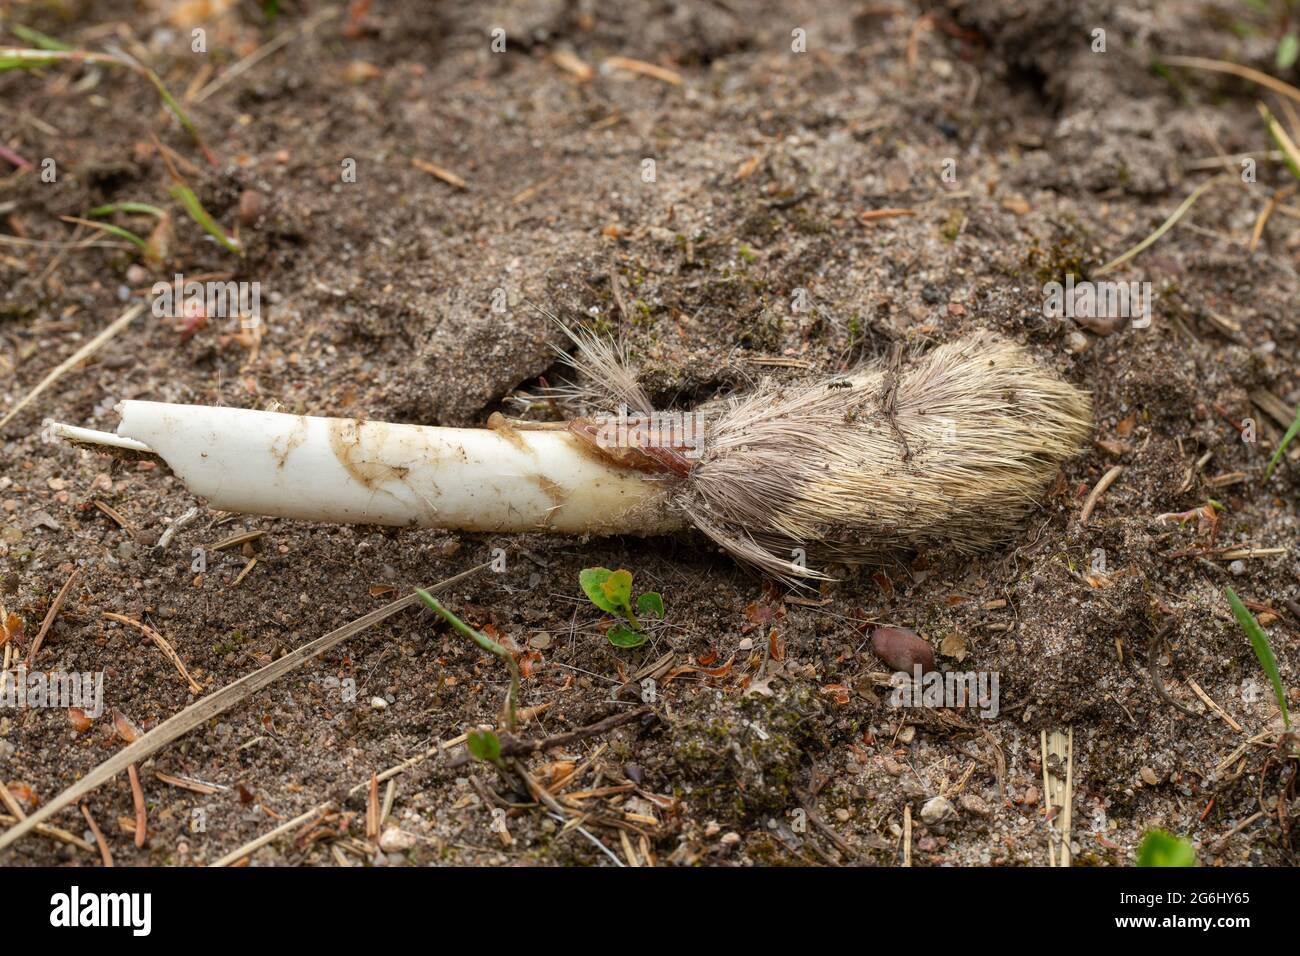 Remains of a deer leg. Stock Photo